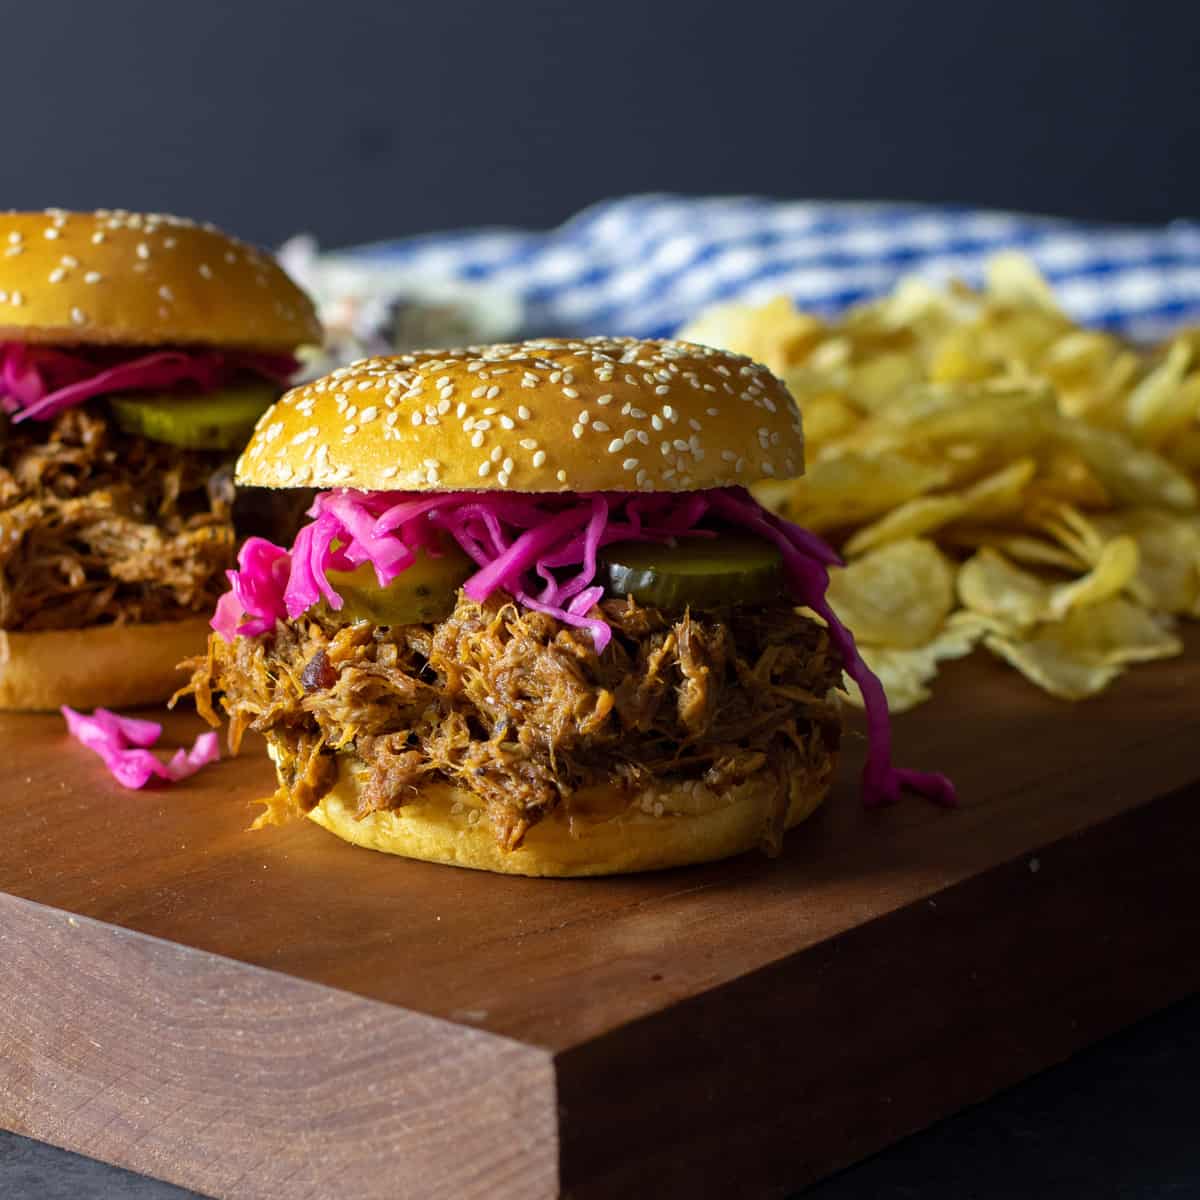 A close up picture of a pulled pork sandwich.